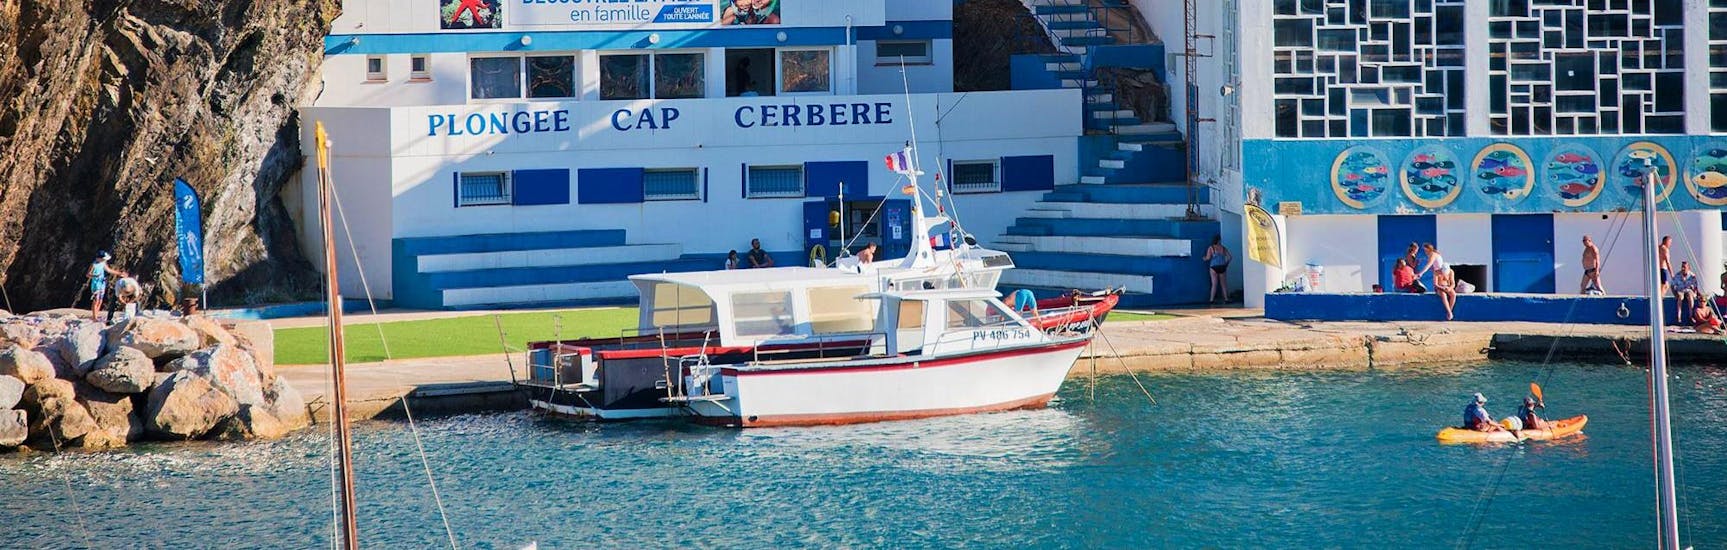 The boat of Plongée Cap Cerbère takes tourists to go to the Snorkeling activity in the marine reserve of Cerbère-Banyuls.